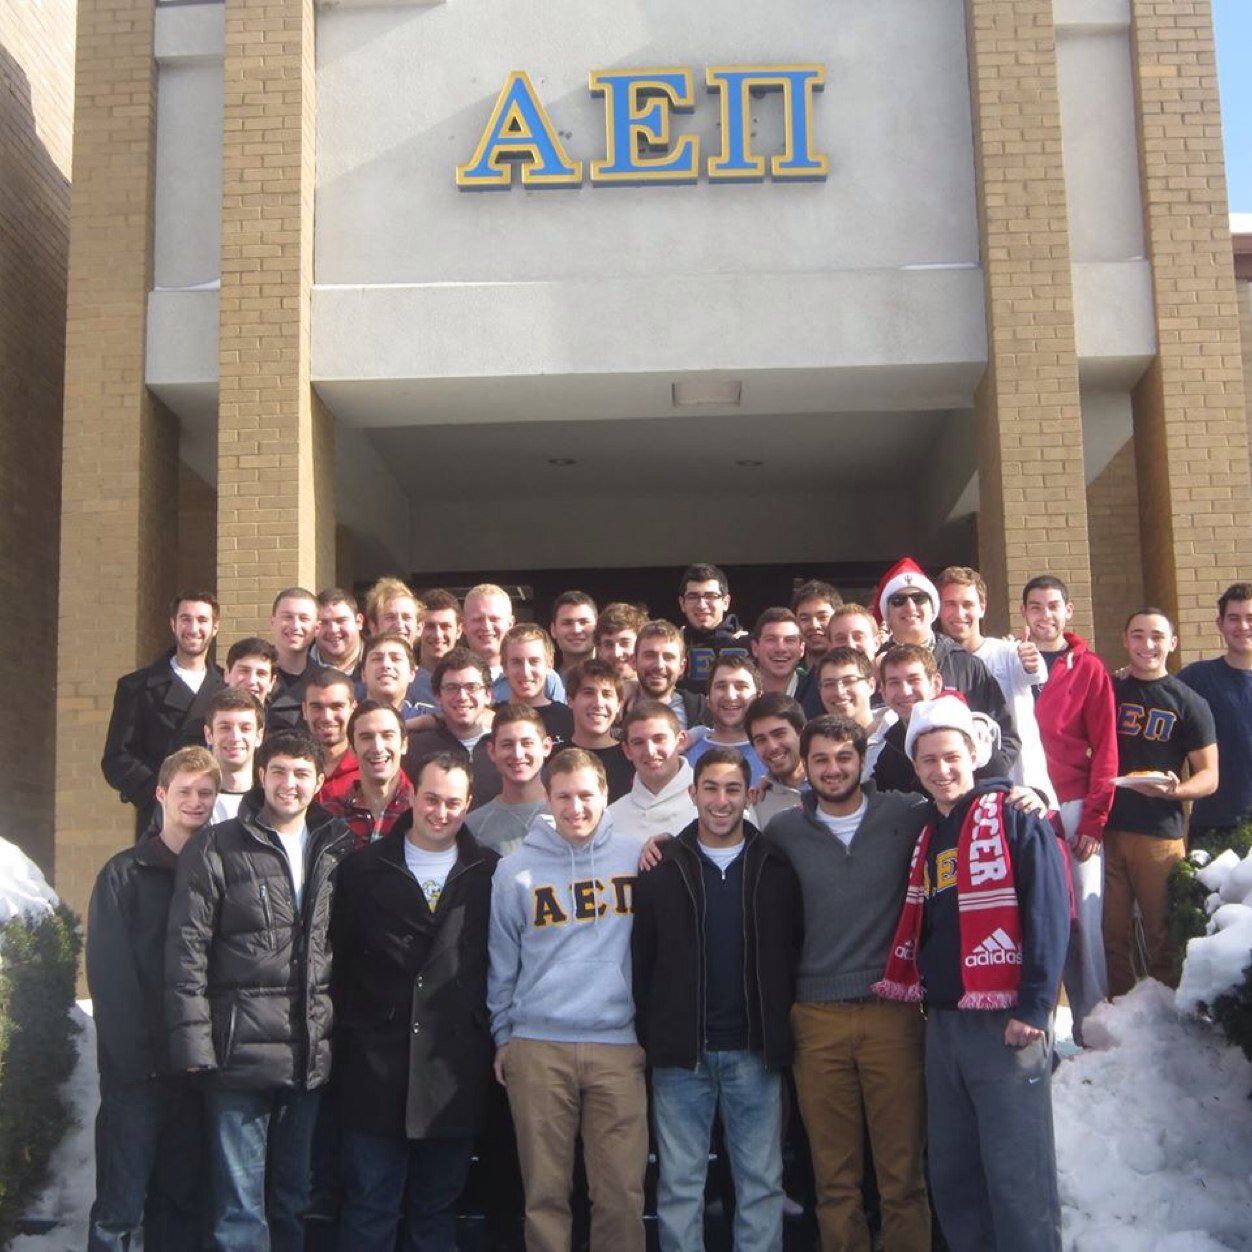 The official twitter for the Beta Iota Chapter of AEPi at Indiana University. https://t.co/LCUfnYhvYd